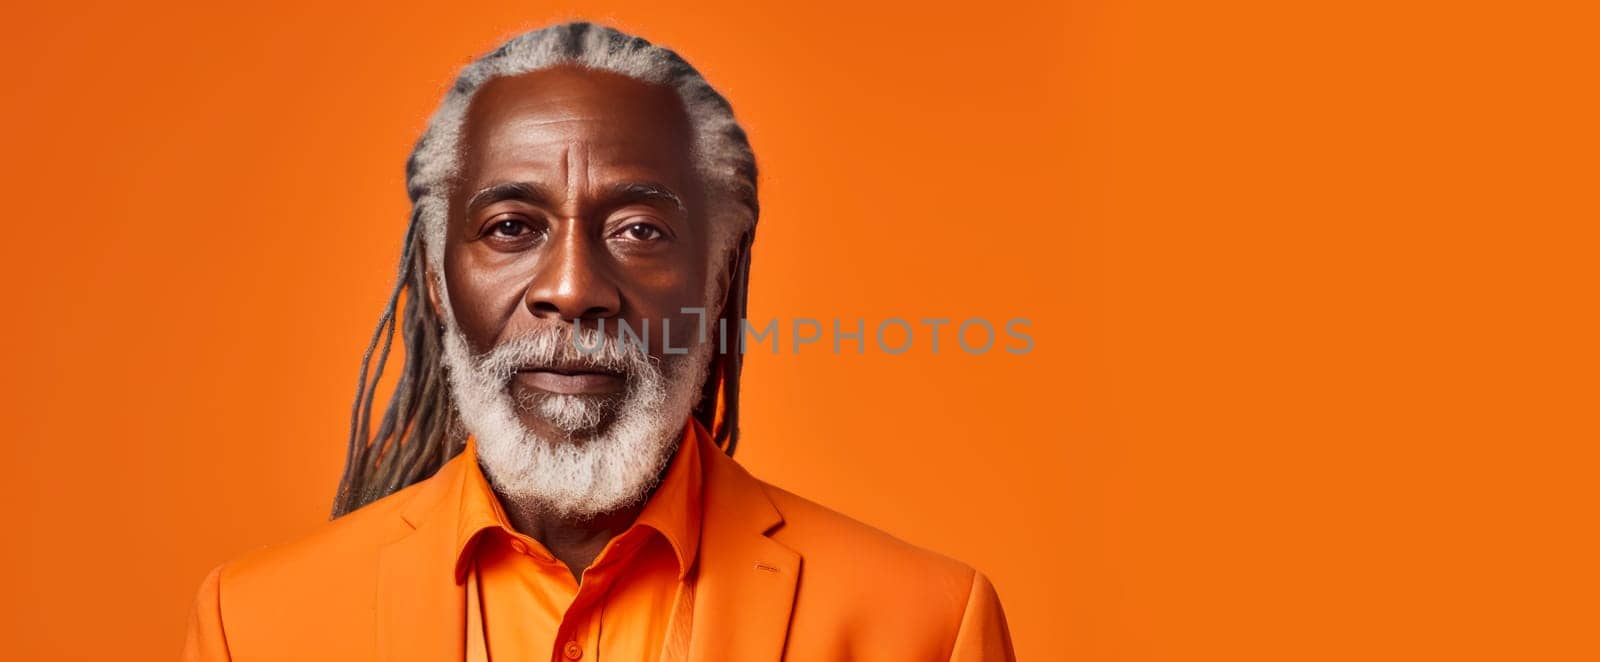 Handsome elderly black African American man with long dreadlocked hair, on an orange background, banner. Advertising of cosmetic products, spa treatments, shampoos and hair care products dentistry and medicine, perfumes and cosmetology for senior men